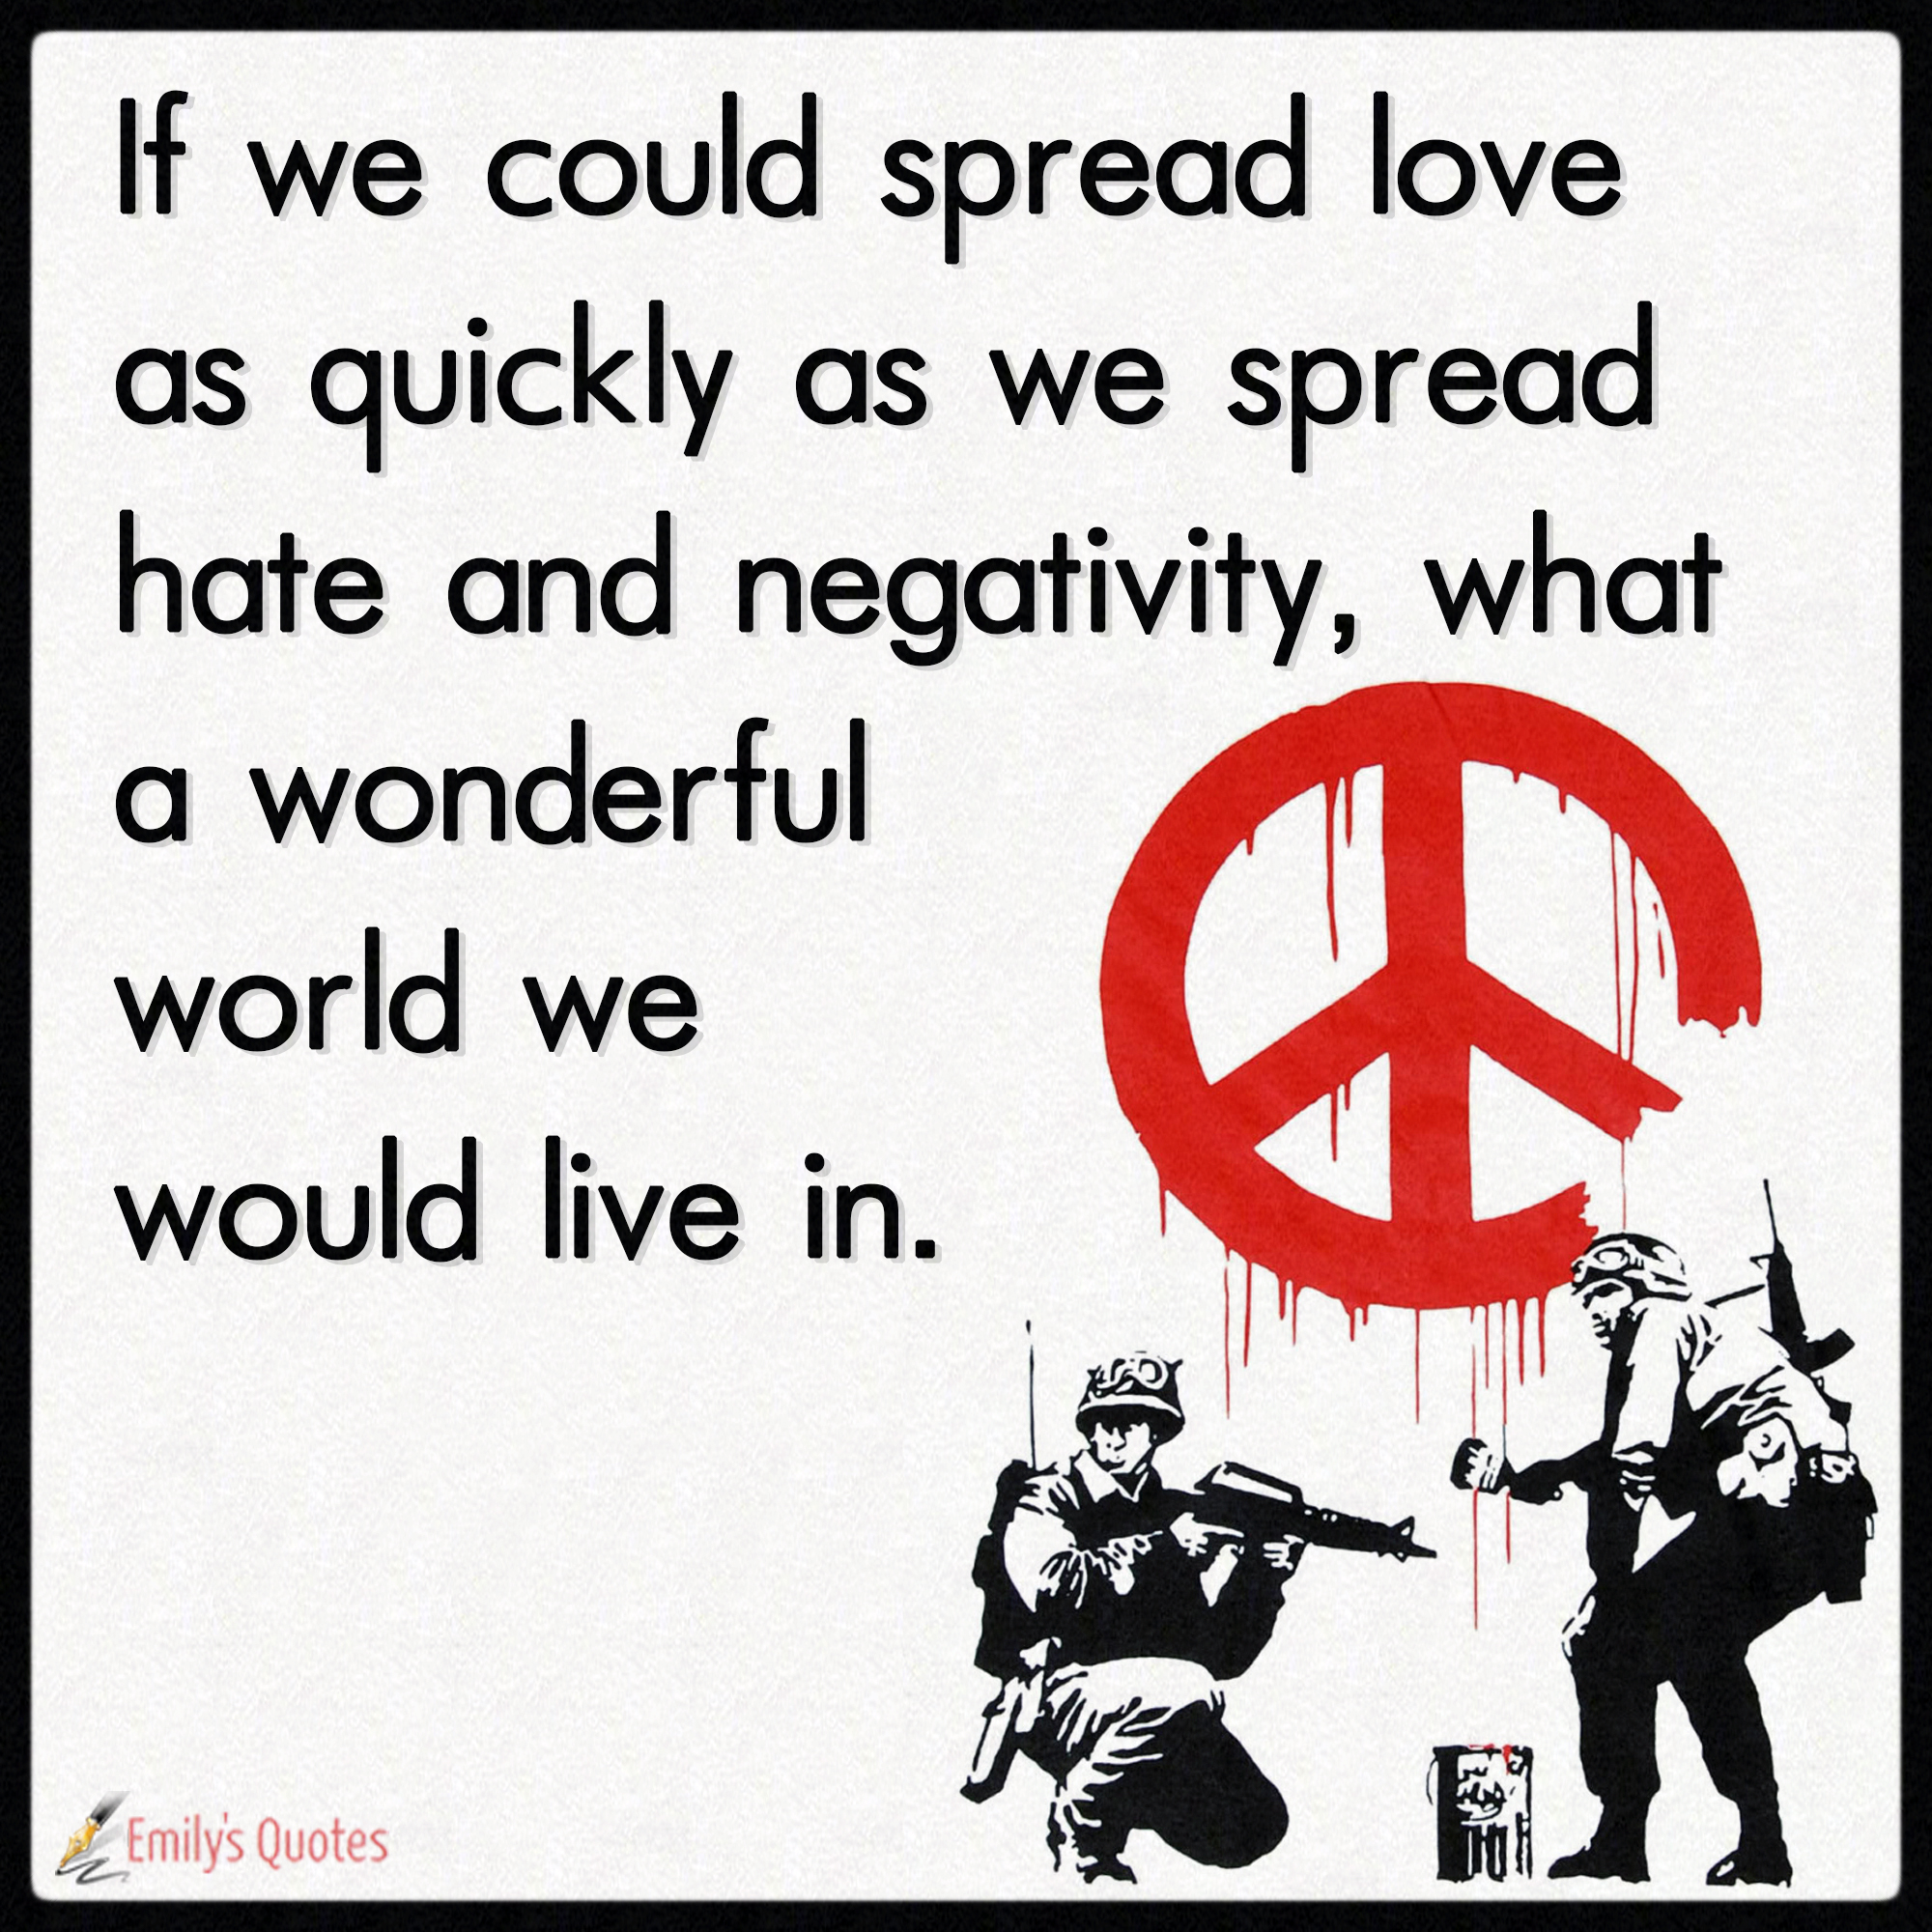 If we could spread love as quickly as we spread hate and negativity, what